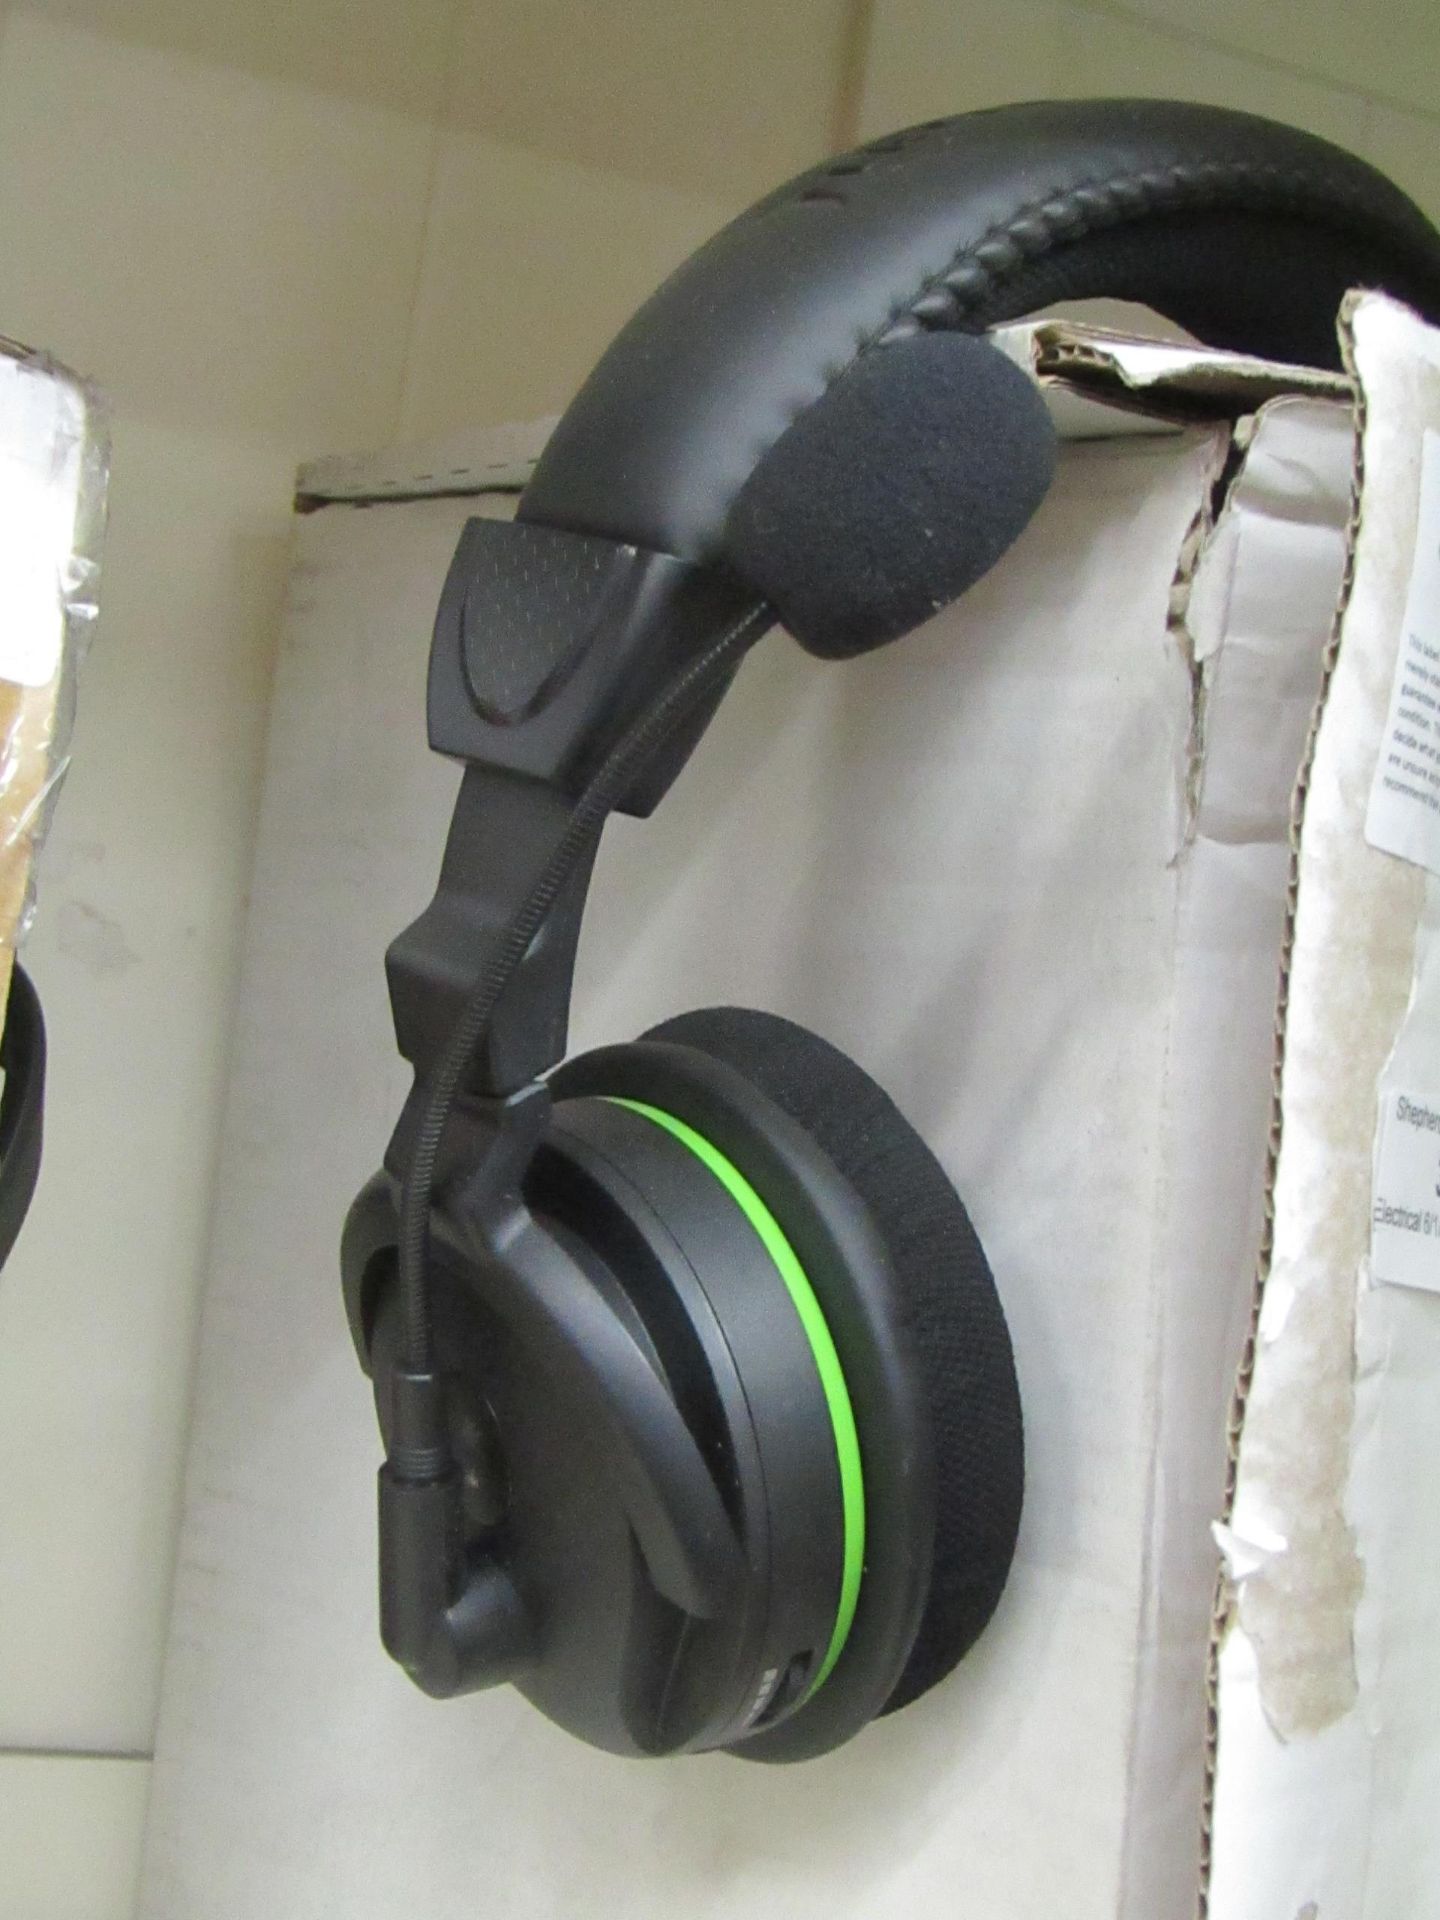 Turtle Beach X42 gaming headset, tested working and boxed.